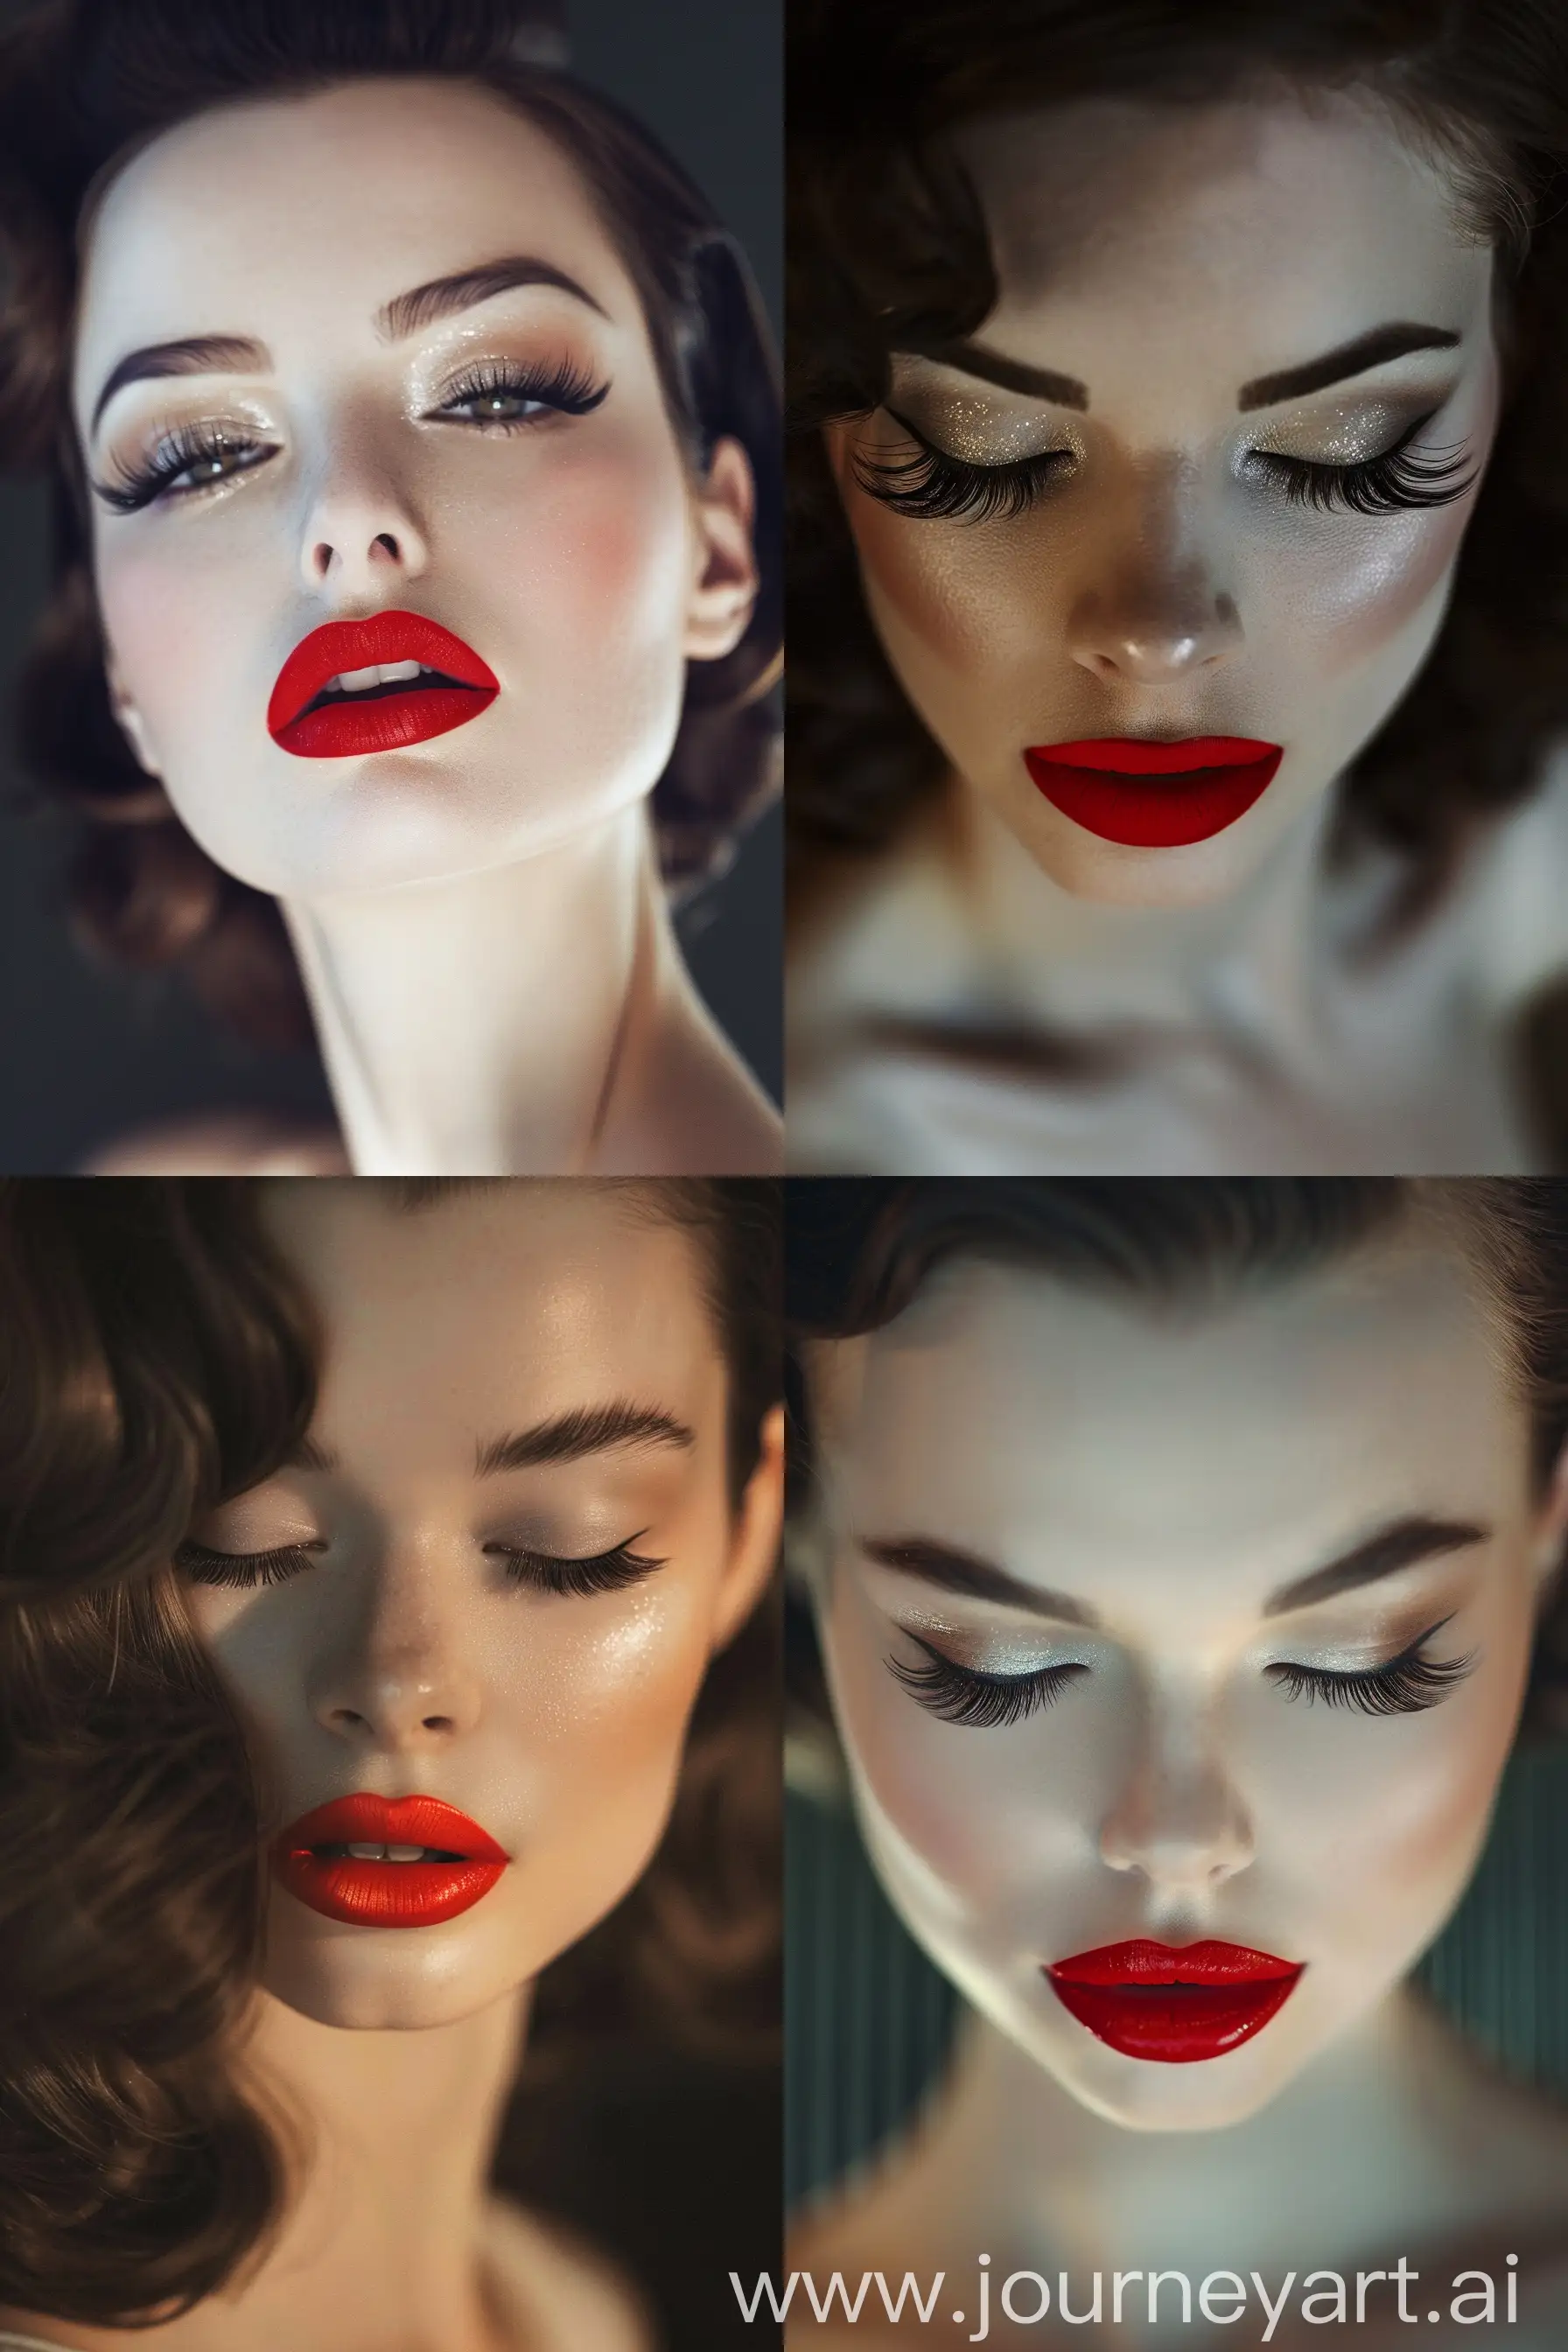 An elegant closeup portrait of a woman exuding a sense of classic
Hollywood glamour. Her full lips are painted with bold red matte lipstick, her
eyelashes are thick with mascara and her cheeks are highlighted to perfection.
The hair is styled in sleek vintage curls. All is set against a backdrop of soft,
diffuse lighting to accentuate the luxurious feel of the scene, at night --ar 2:3 --v 6.0 --
style raw